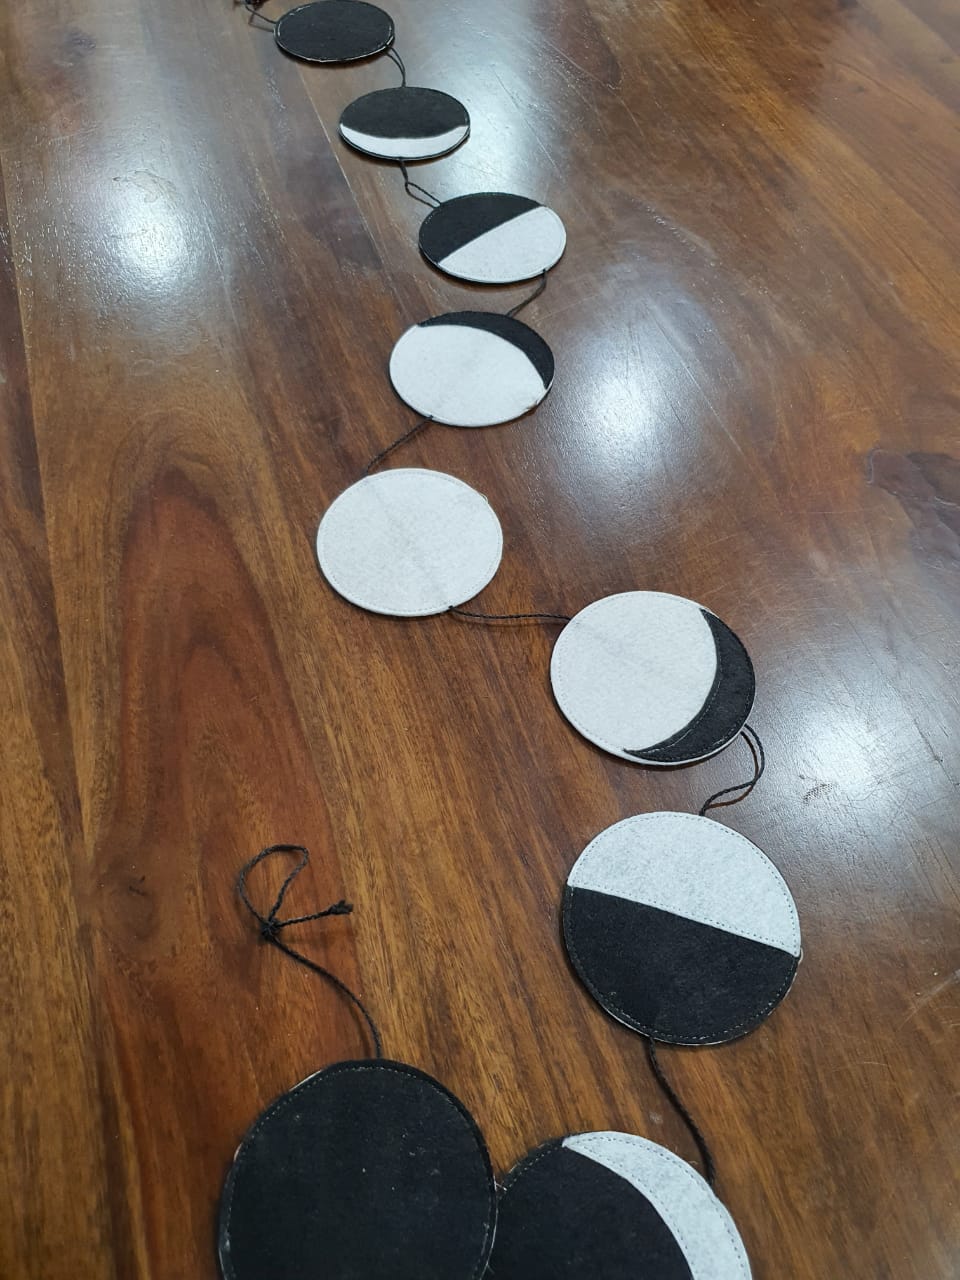 Moon Phases Bunting